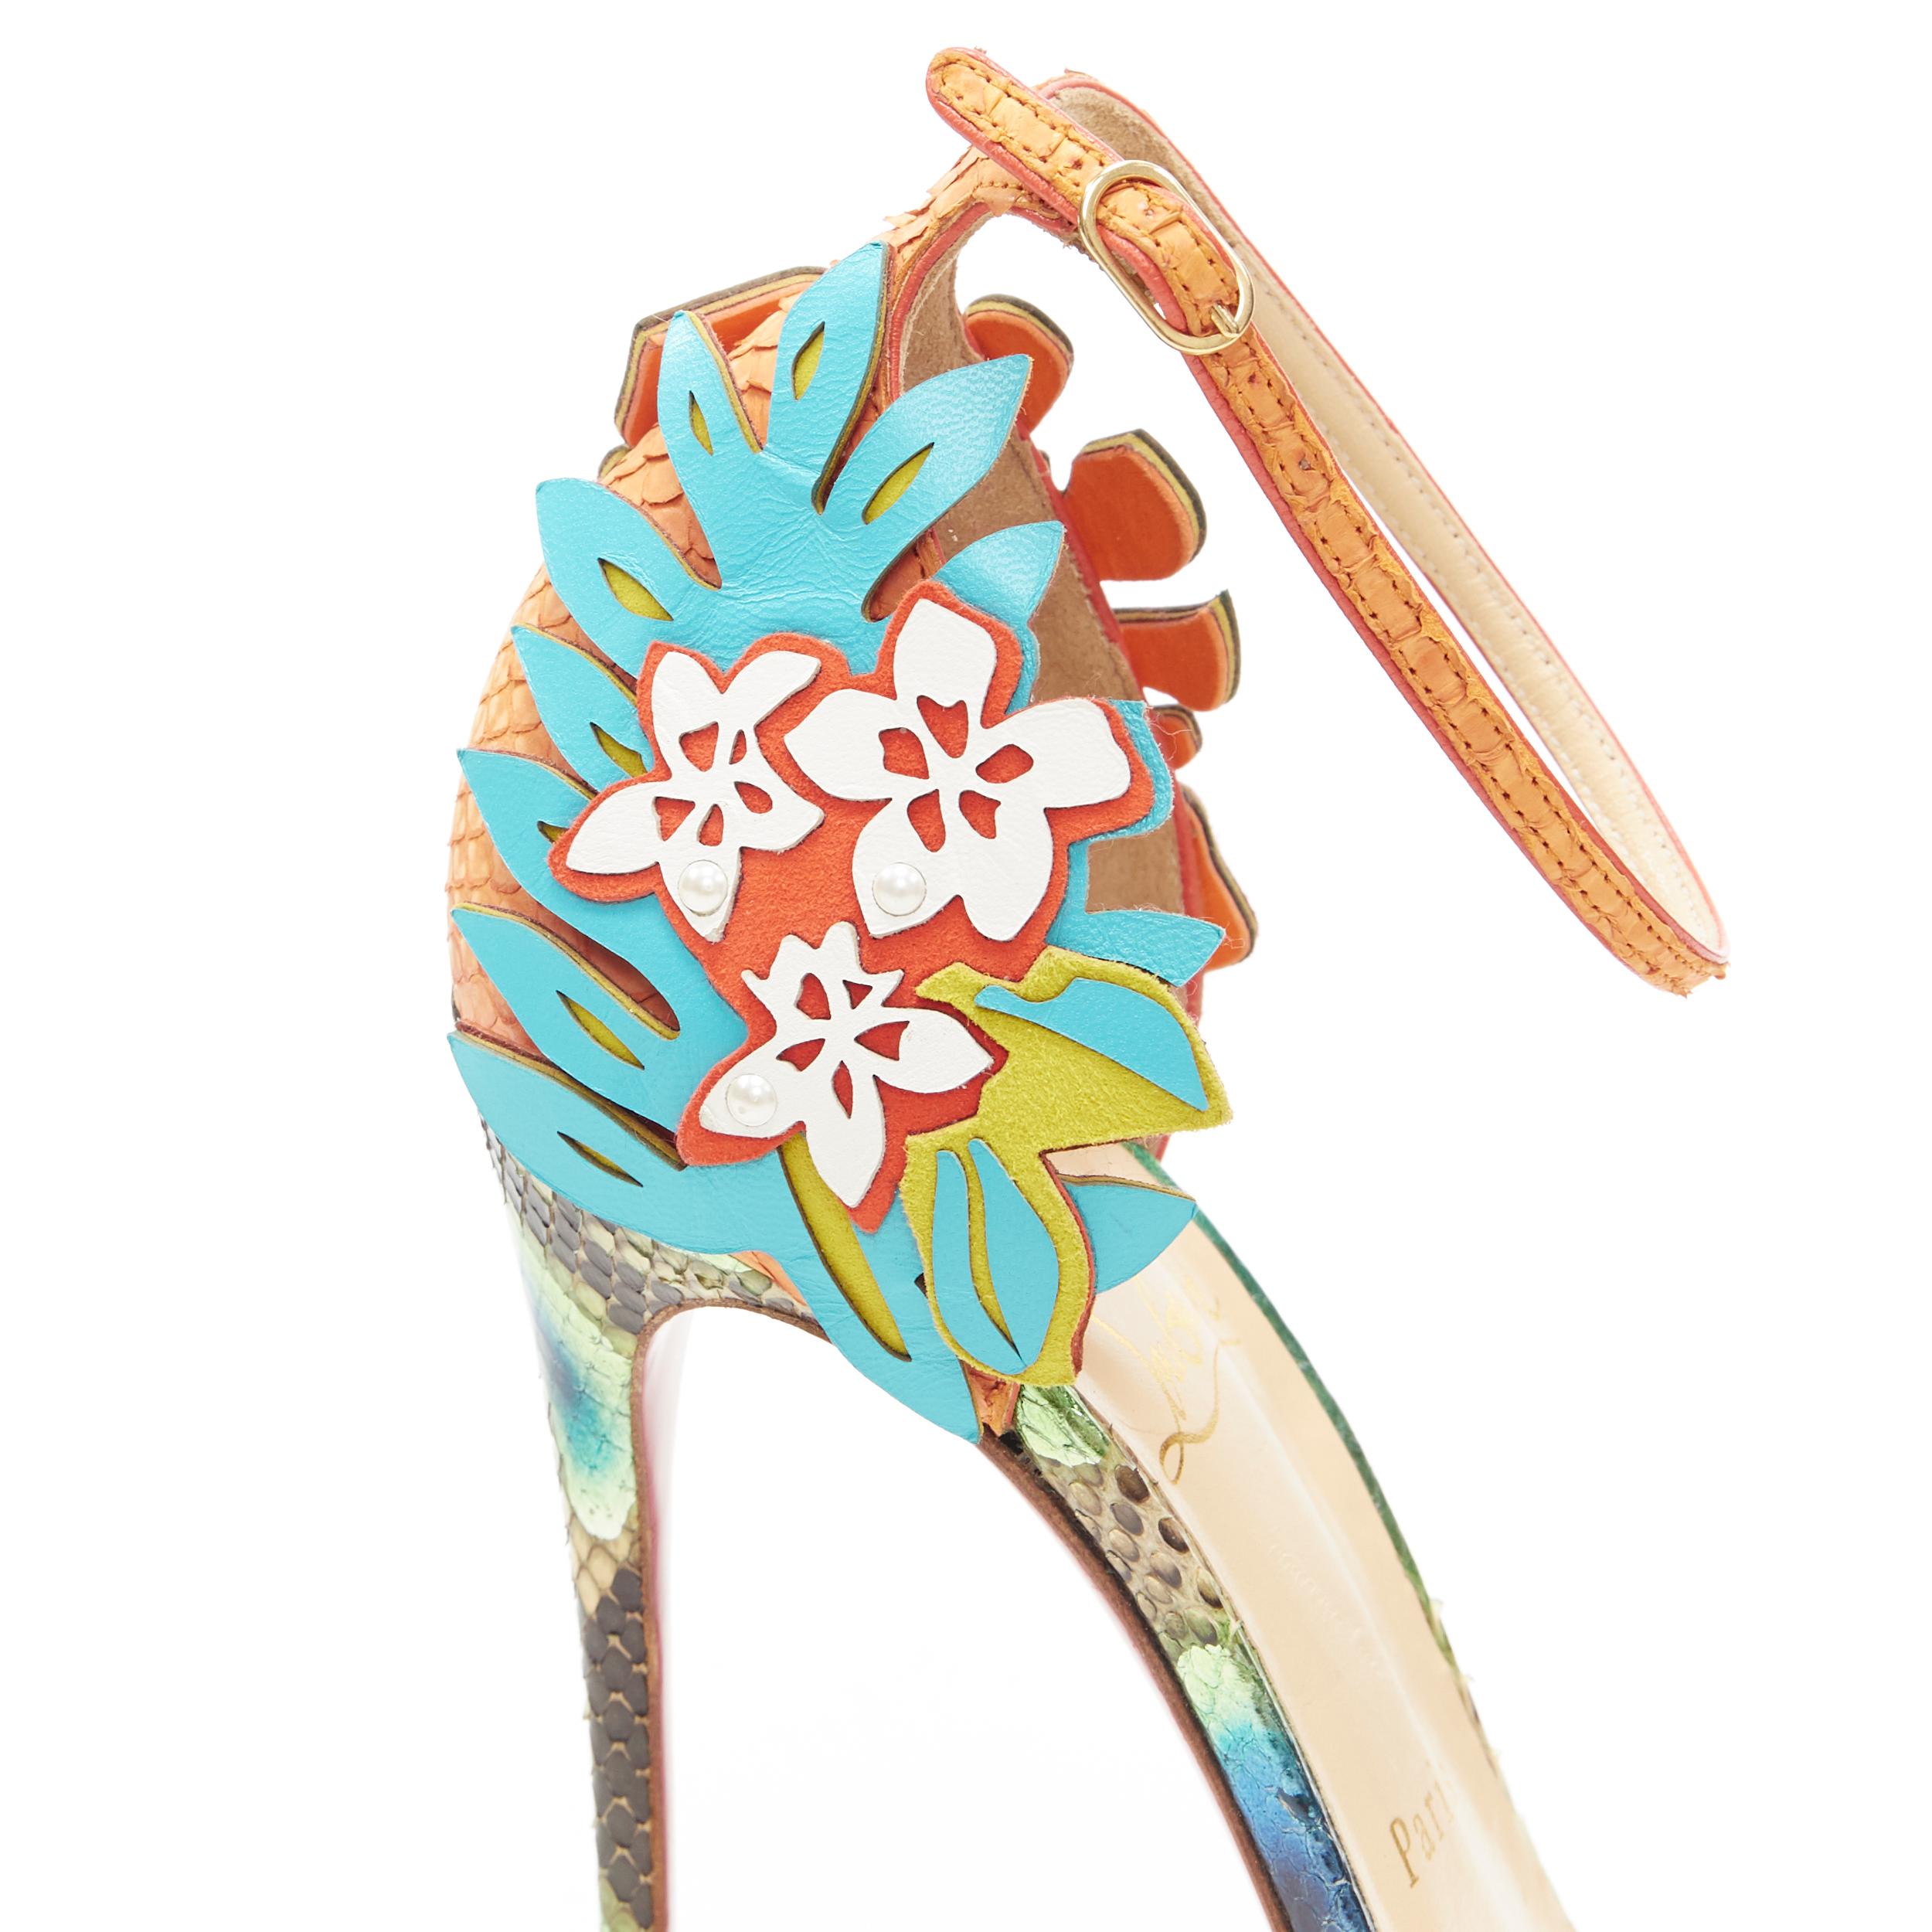 CHRISTIAN LOUBOUTIN Ha Why Luna 120 floral pearl strass ankle strap heel EU38 1